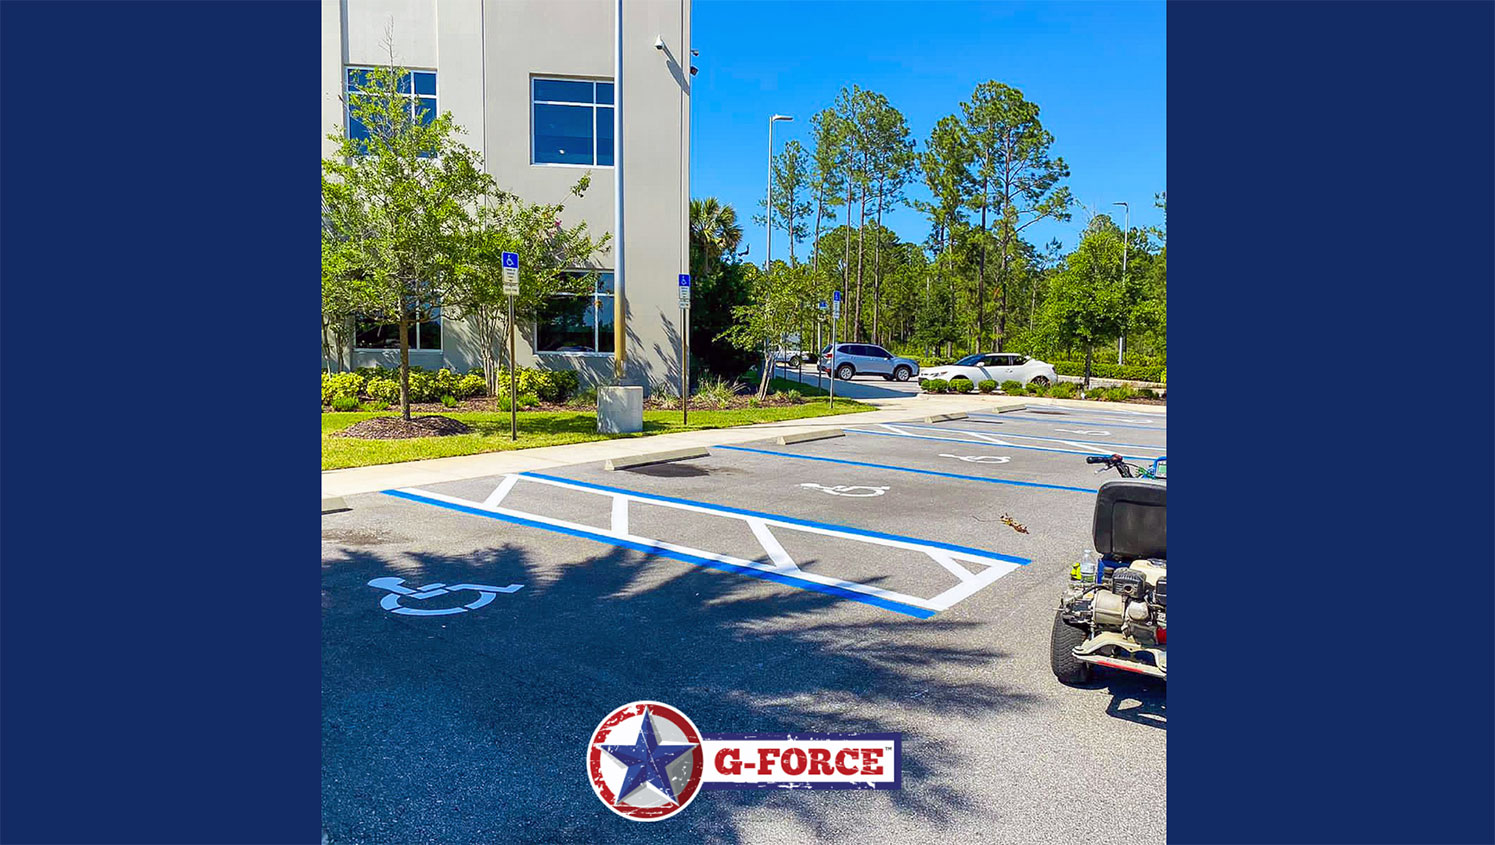 new ADA accessible parking spaces at DaVita labs in Deland, FL.